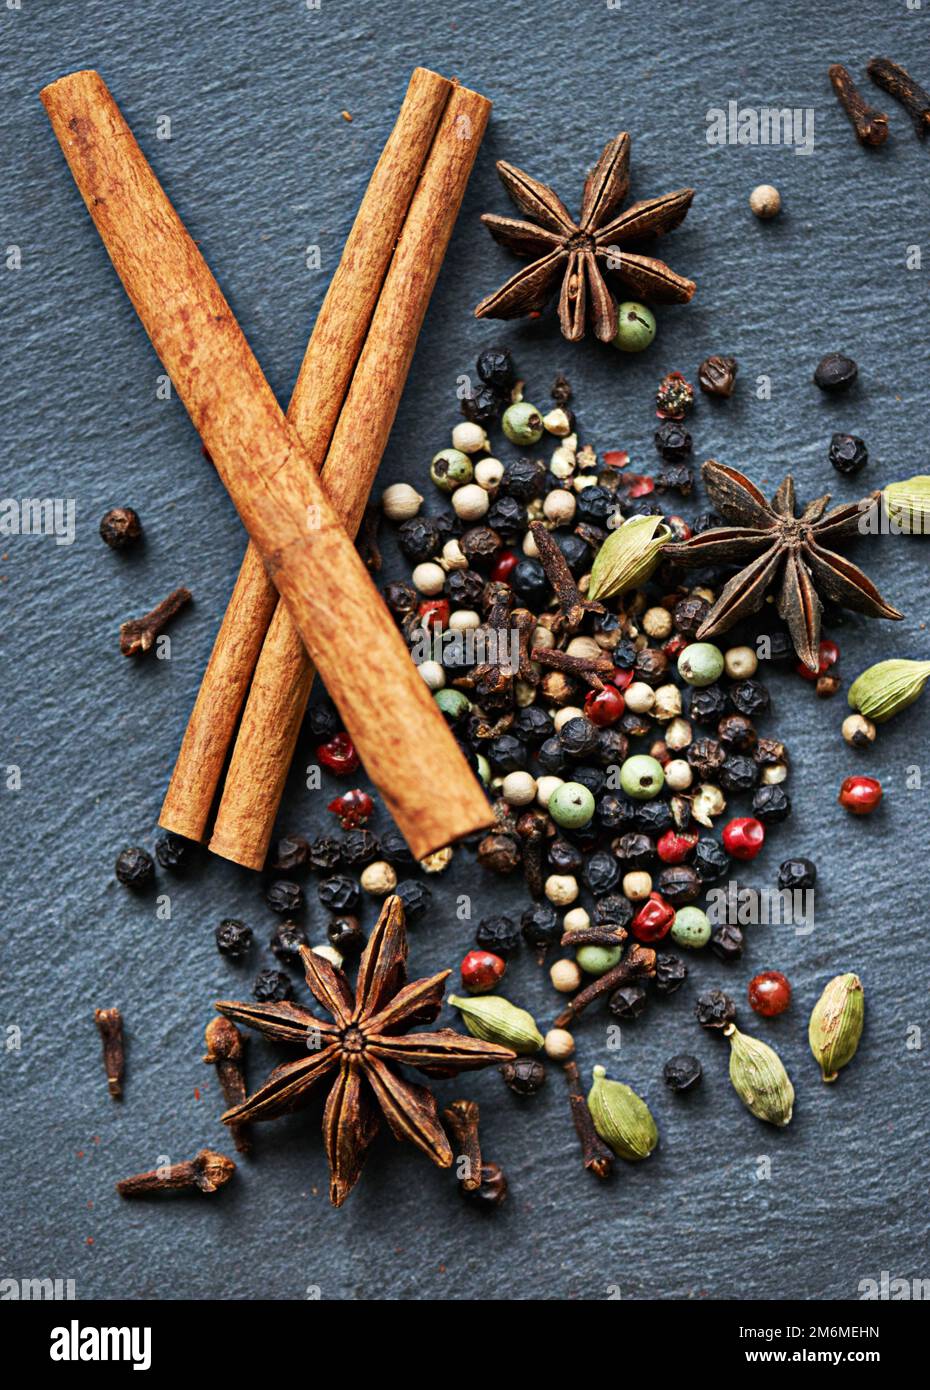 Ready to make a mouth-watering curry. an assortment of colorful spices. Stock Photo